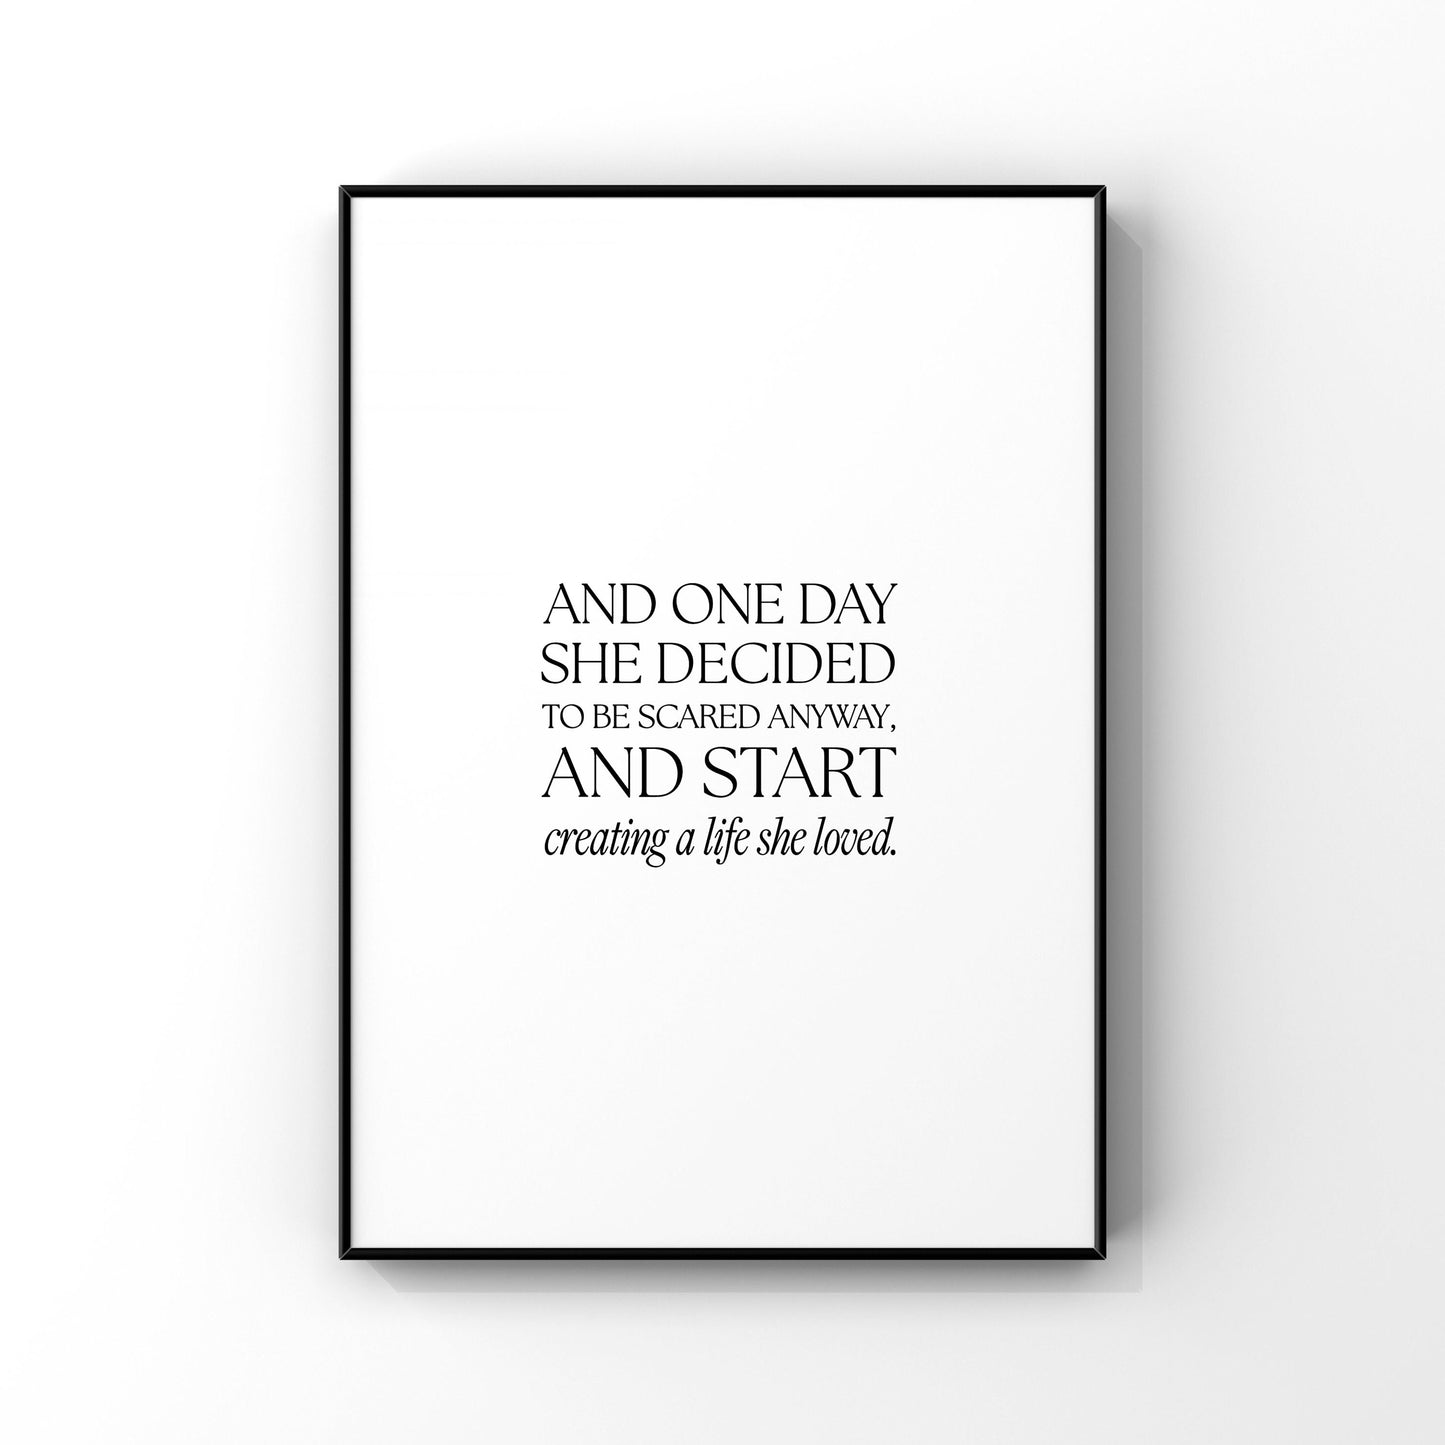 And one day she decided,Create a life she loved,Inspirational wall art,Motivational quote print,Positive quote,Wall art,Female empowerment